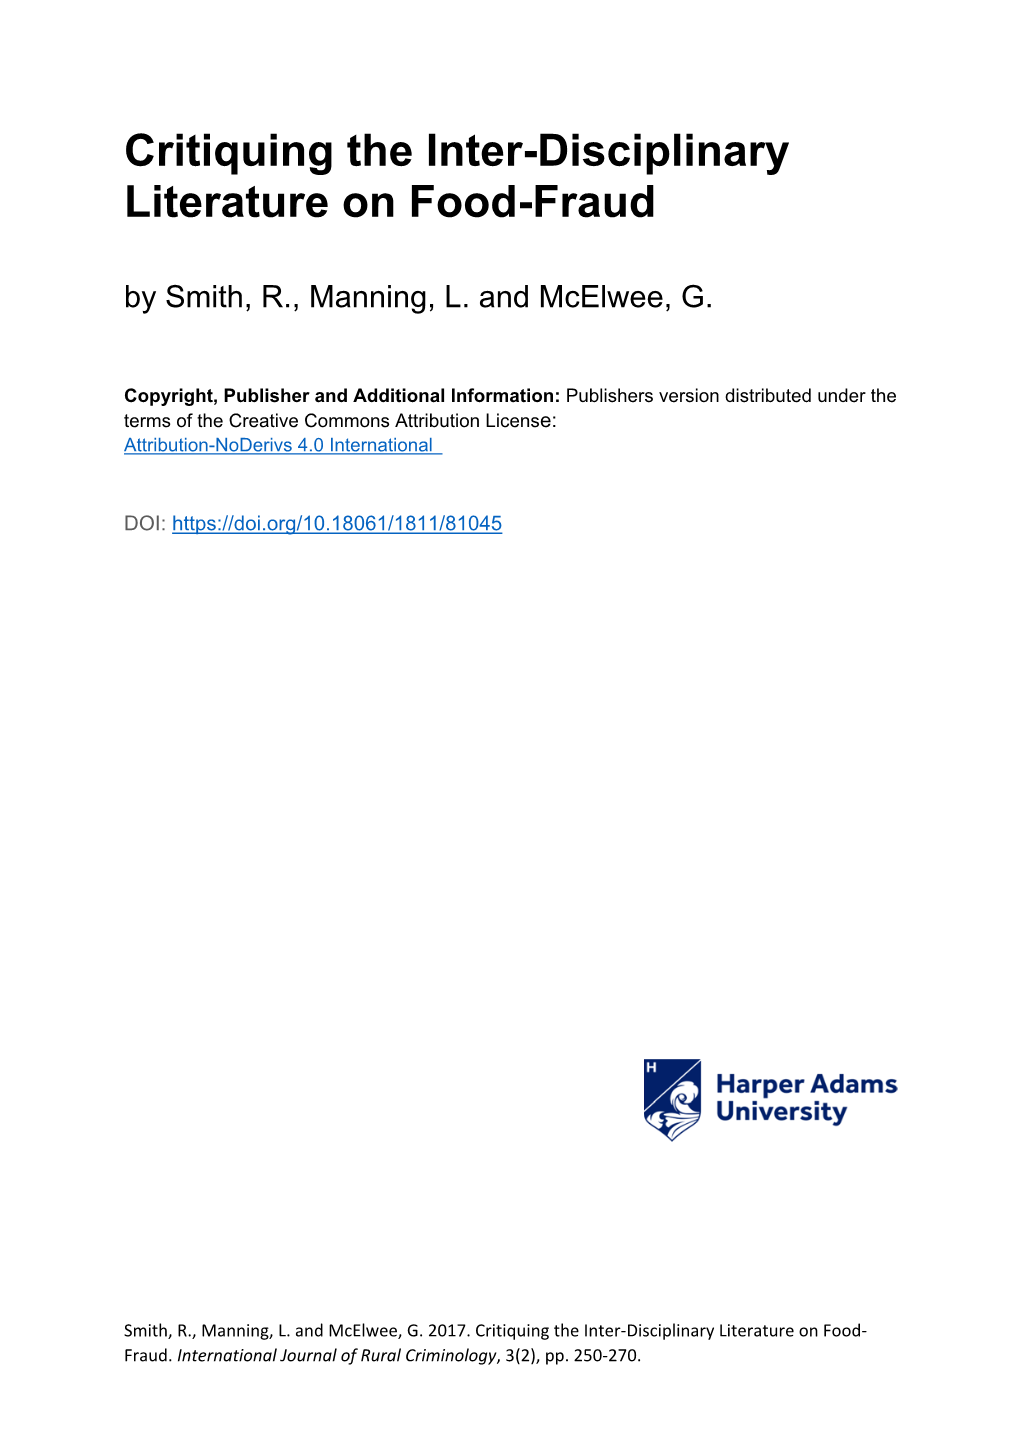 Critiquing the Inter-Disciplinary Literature on Food-Fraud by Smith, R., Manning, L